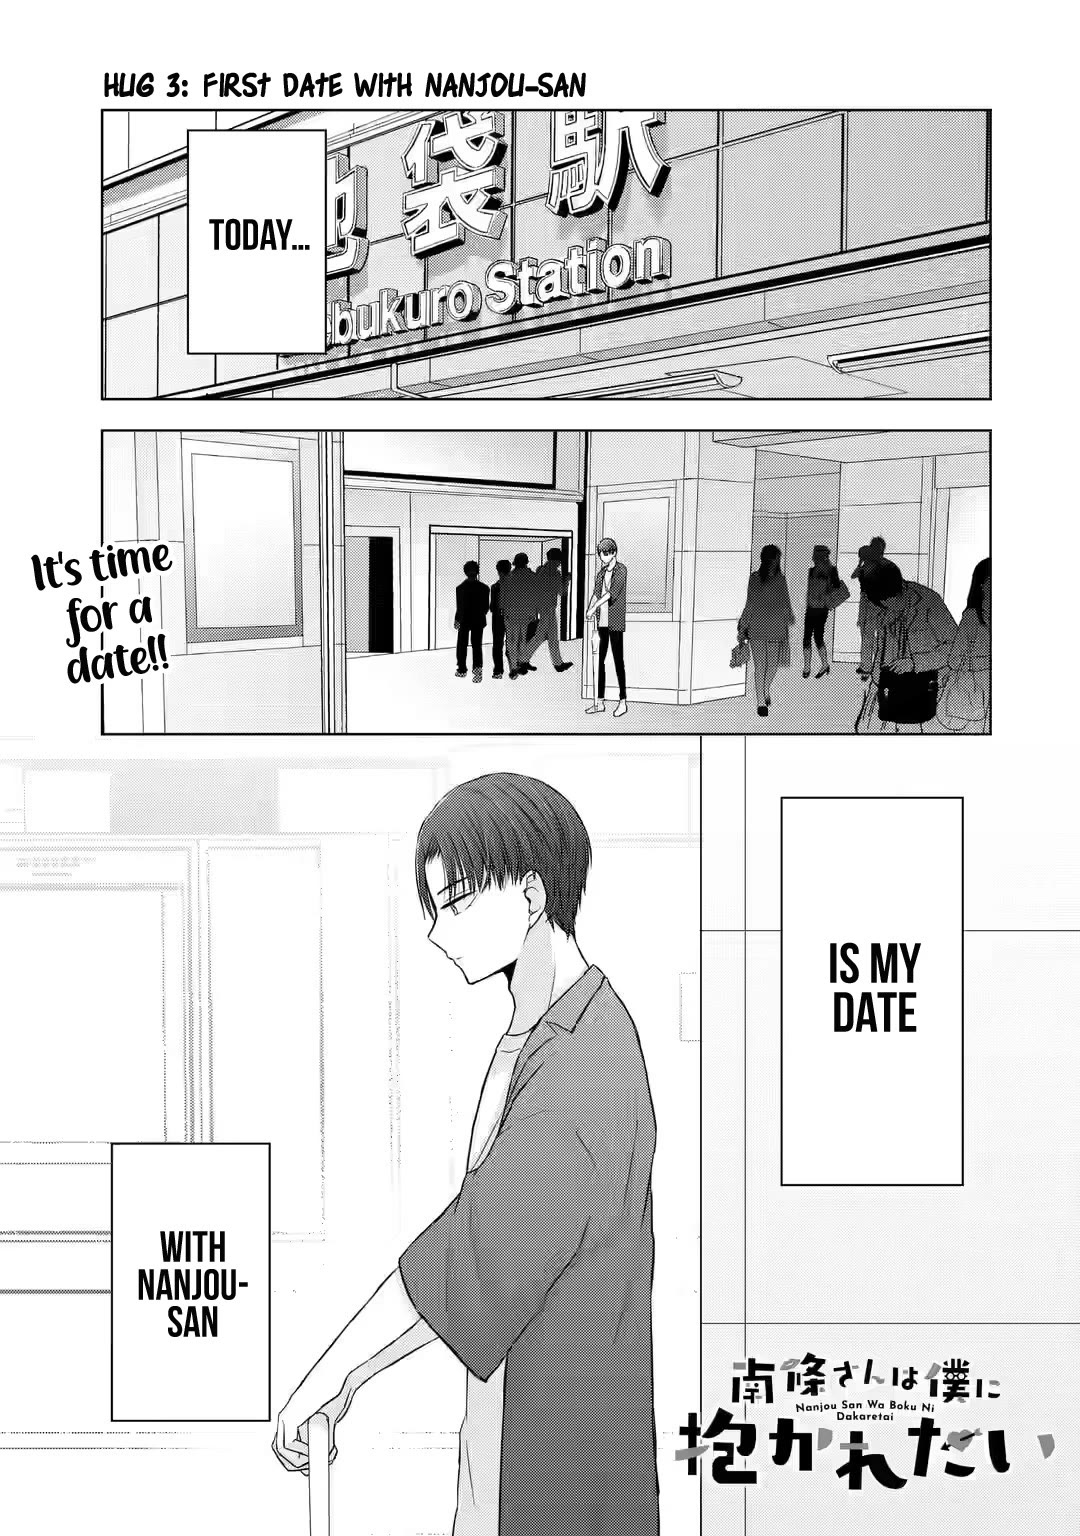 Nanjou-san Wants to Be Held by Me - chapter 3 - #1